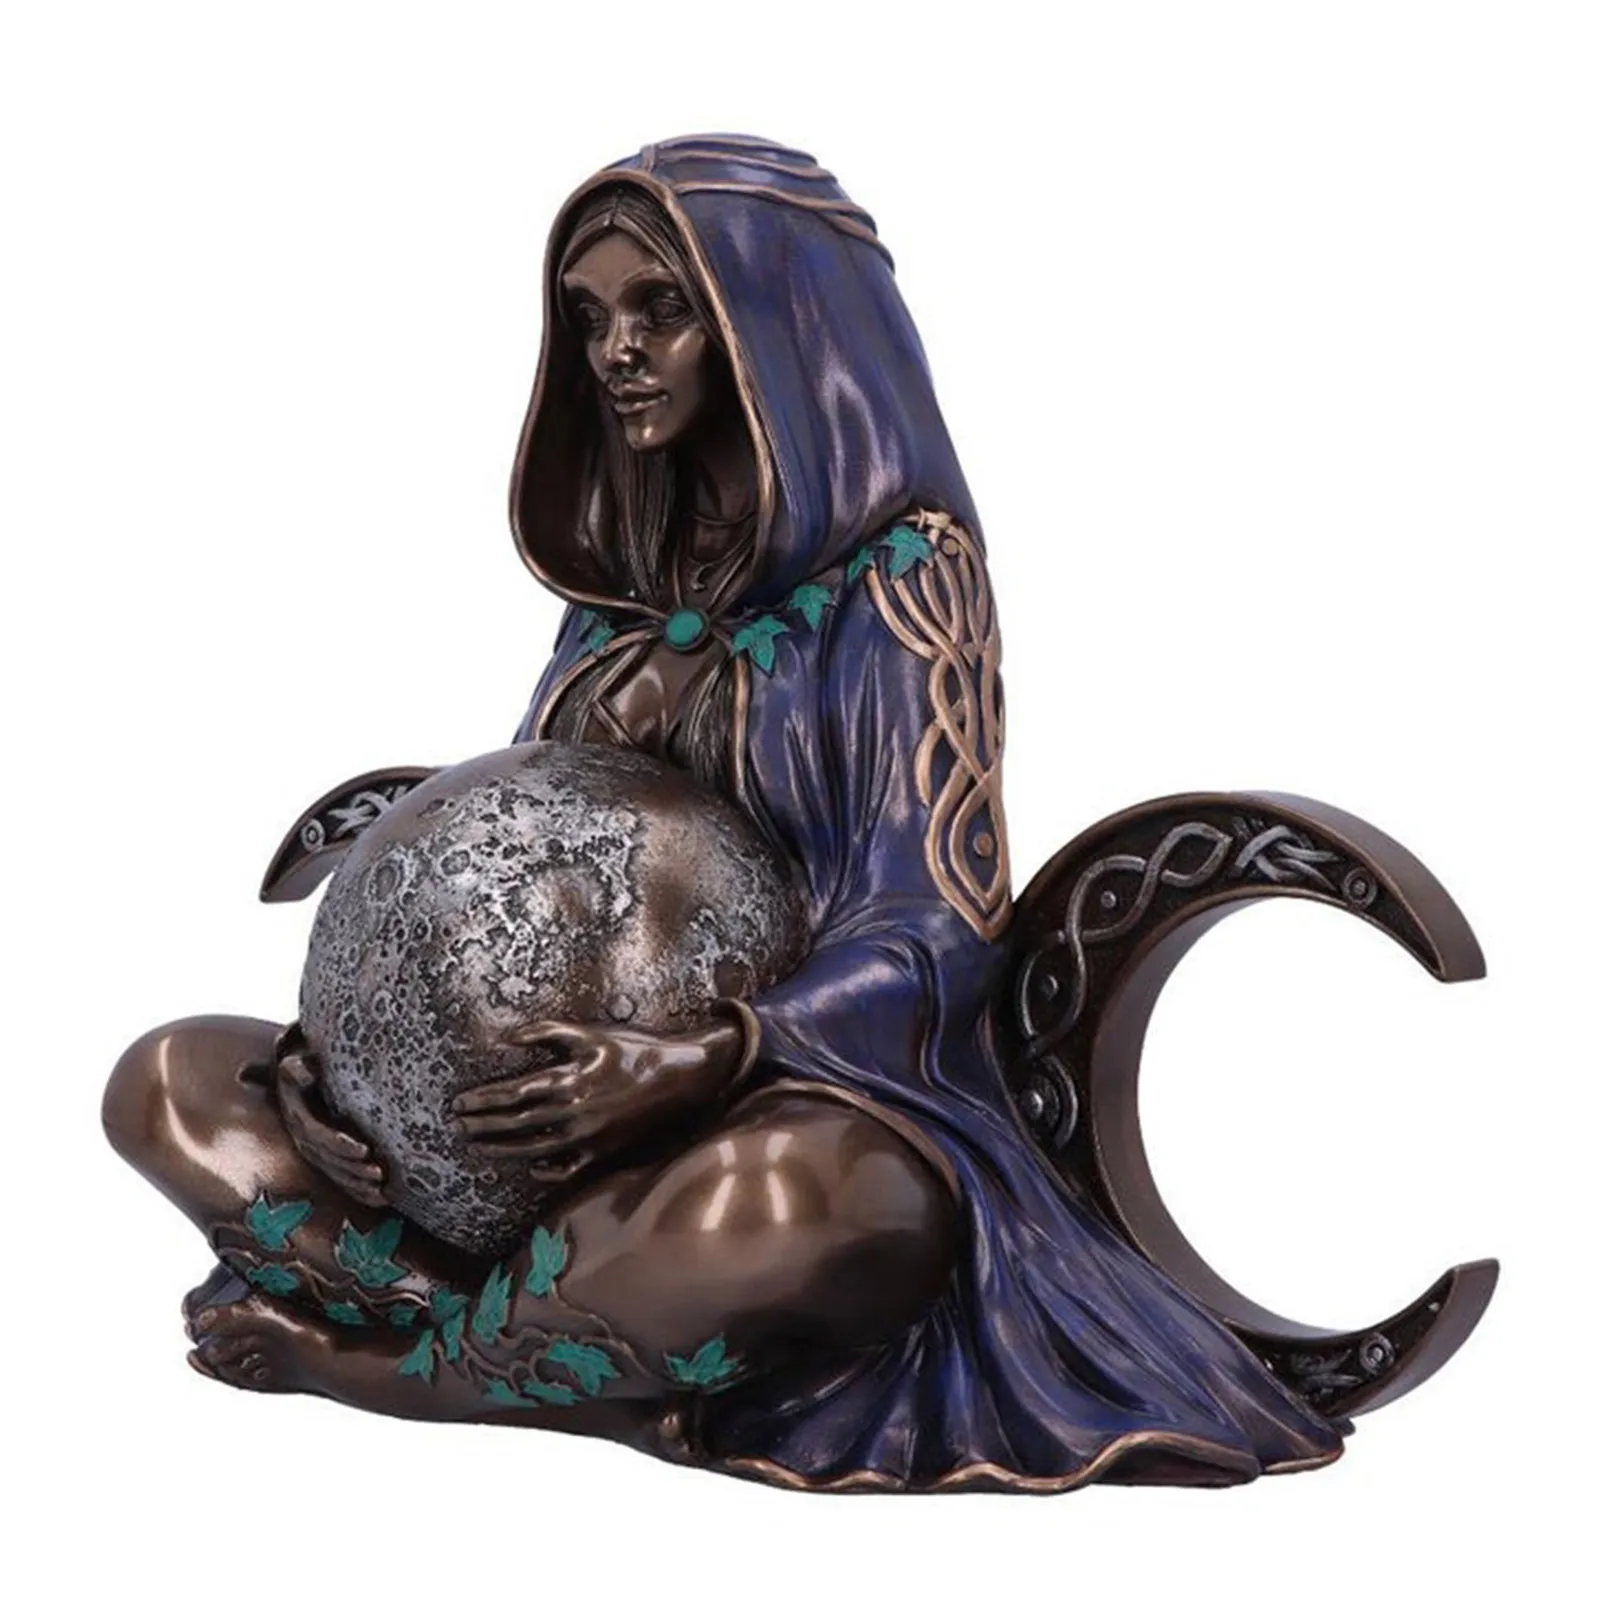 

Mother Earth Statue Millennial Gaia Statue Spiritual Items Figurines Home Decor Mother's Day Gift Ornament